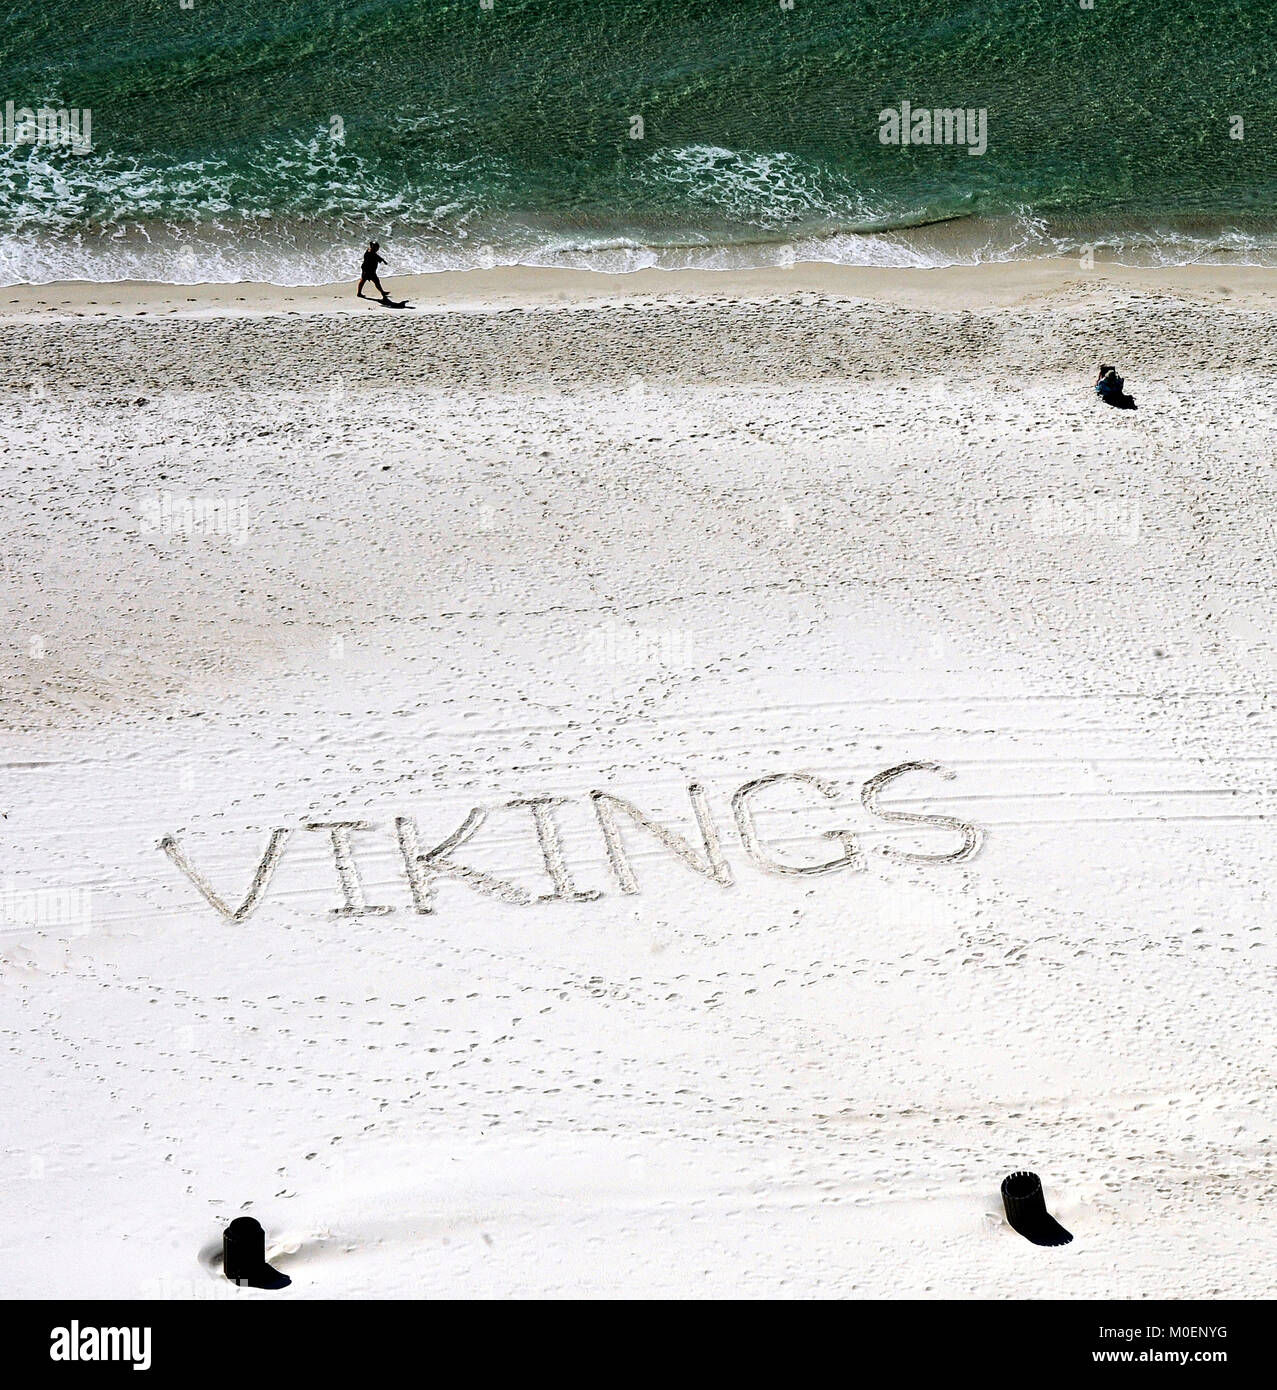 Panama City Beach, Florida, United States. 21st Jan, 2018. January 21, 2018 - Panama City Beach, Florida, United States - The word "Vikings" is seen written in the sand at Panama City Beach, Florida on January 21, 2018, hours before the Minnesota Vikings faced the Philadelphia Eagles in the National Football Conference (NFC) playoff game. Both teams were fighting for a spot in Super Bowl LII on February 4, 2018. The Vikings lost to the Eagles 7-38. Credit: Paul Hennessy/Alamy Live News Stock Photo